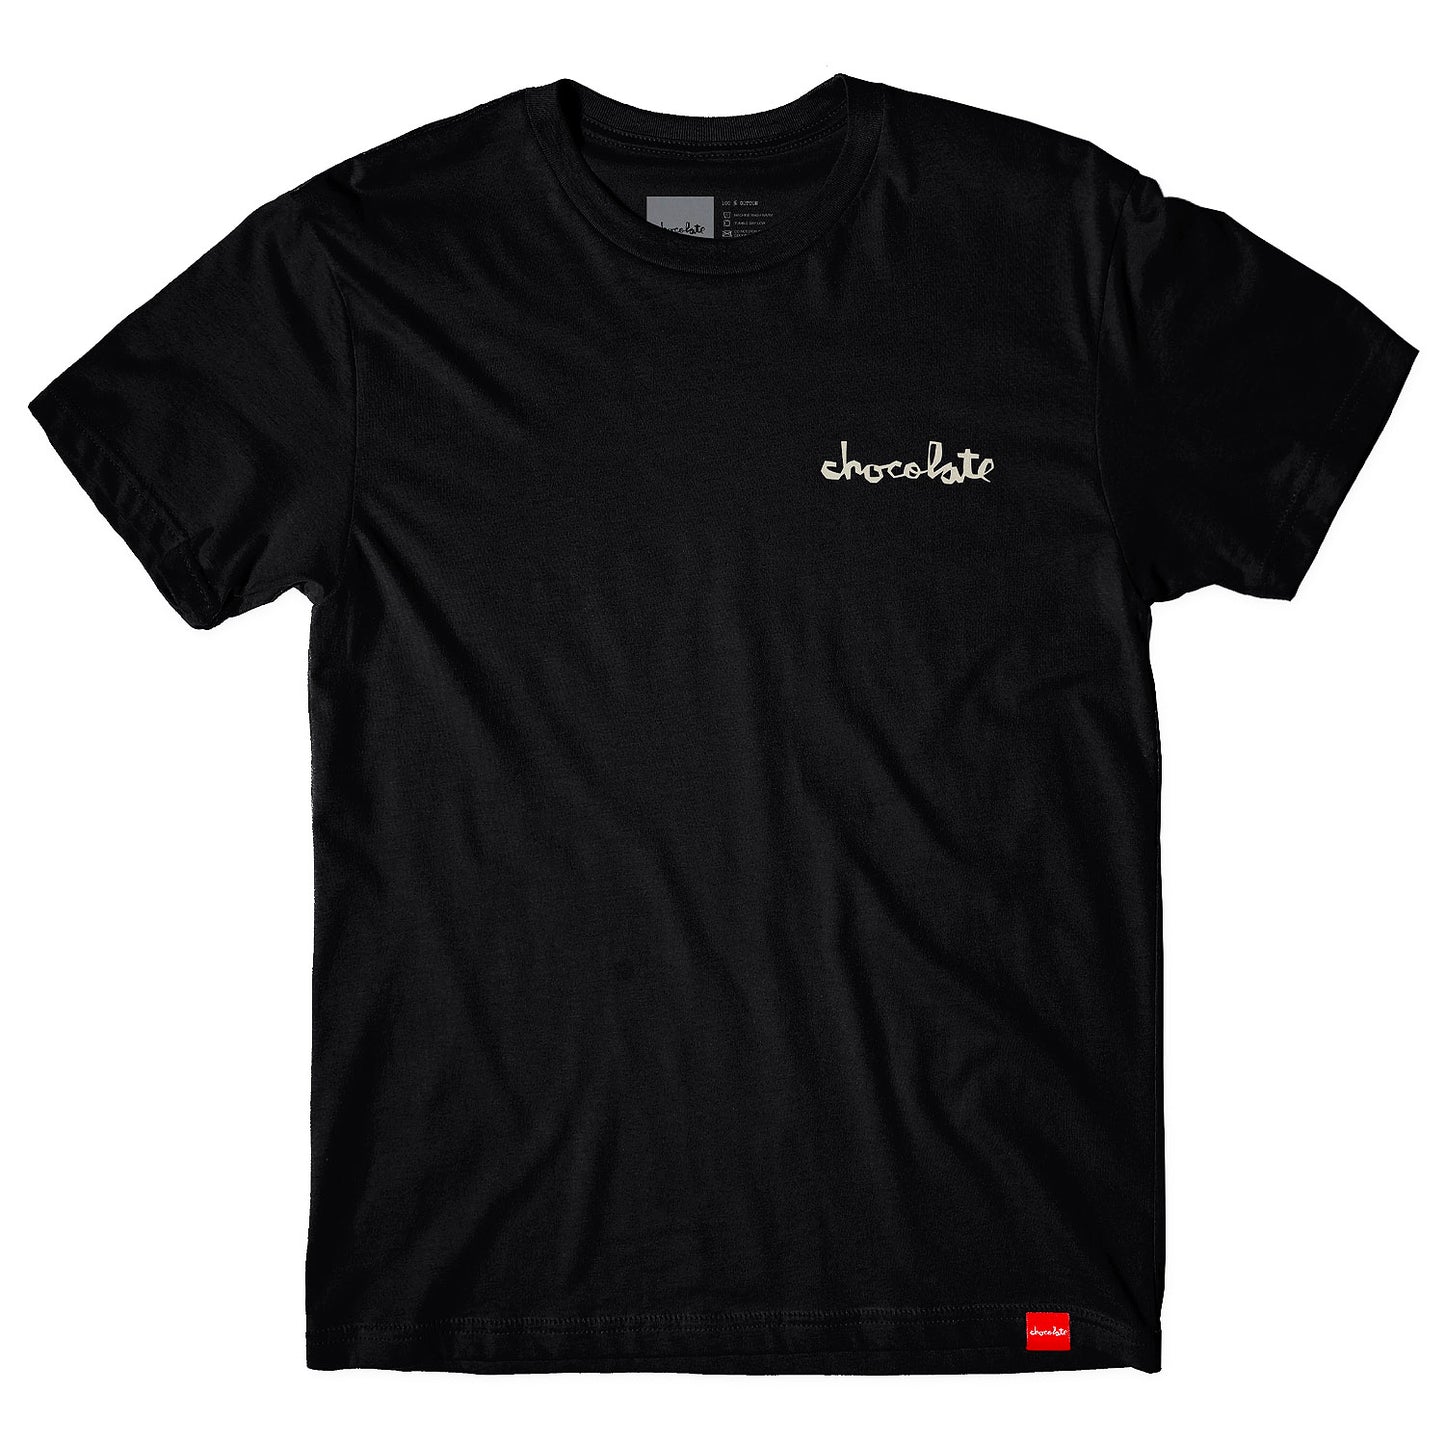 Chocolate Skateboards - Reflective Chunk T-Shirt - Black - Prime Delux Store